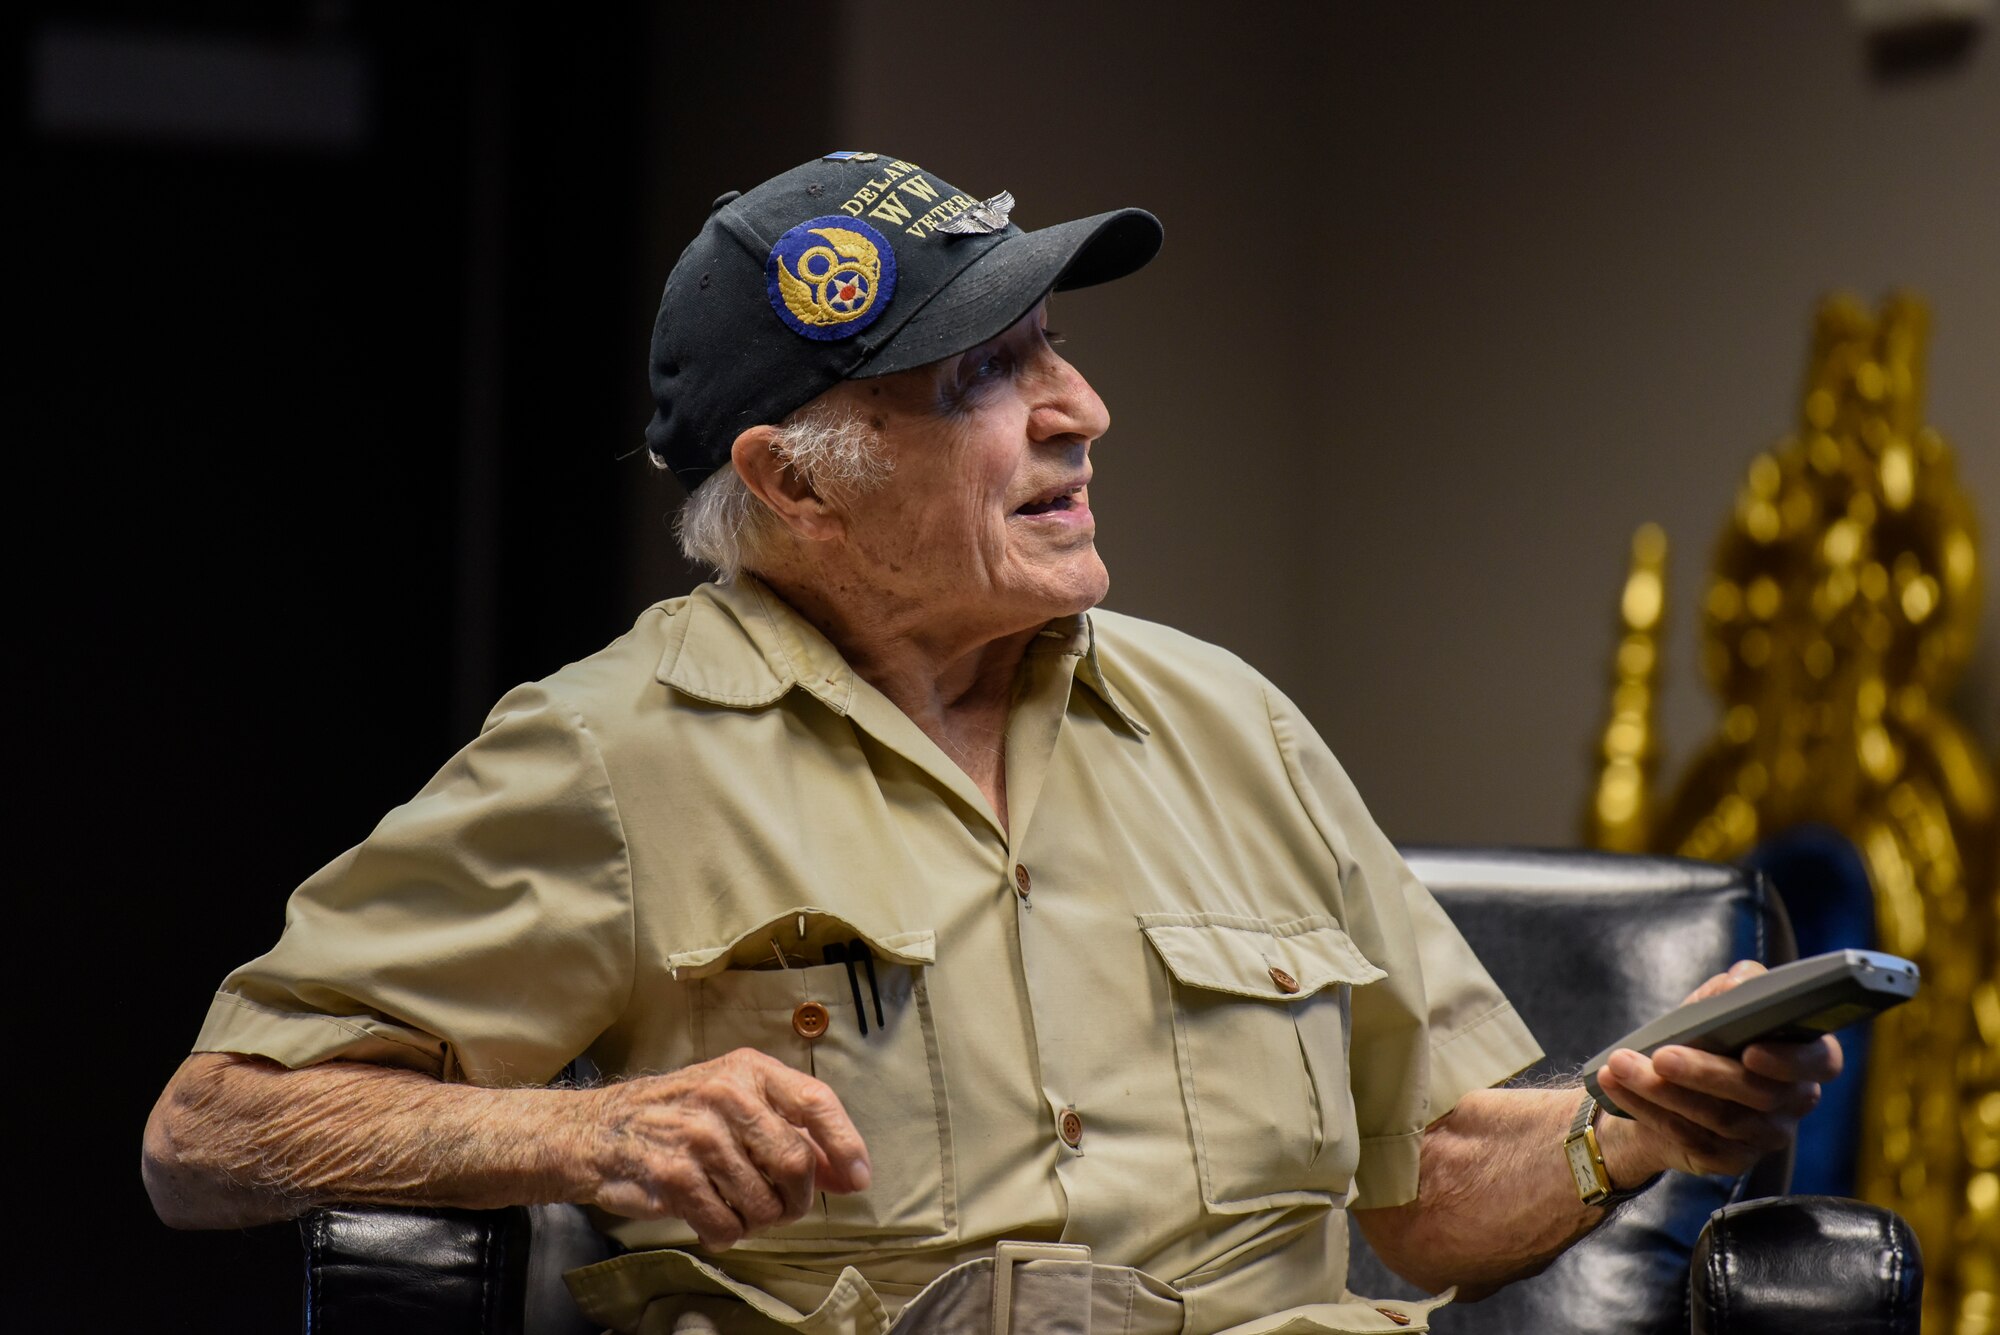 Retired Army Air Corps 1st Lt. Ray Firmani, World War II B-17 pilot, speaks at the quarterly Hangar Talk May 10, 2018, at Dover Air Force Base, Del. Firmani was inducted into the Delaware Aviation Hall of Fame in 2015 for his service in the 486th Heavy Bombardment Group during World War II. (U.S. Air Force photo by Airman 1st Class Zoe M. Wockenfuss)